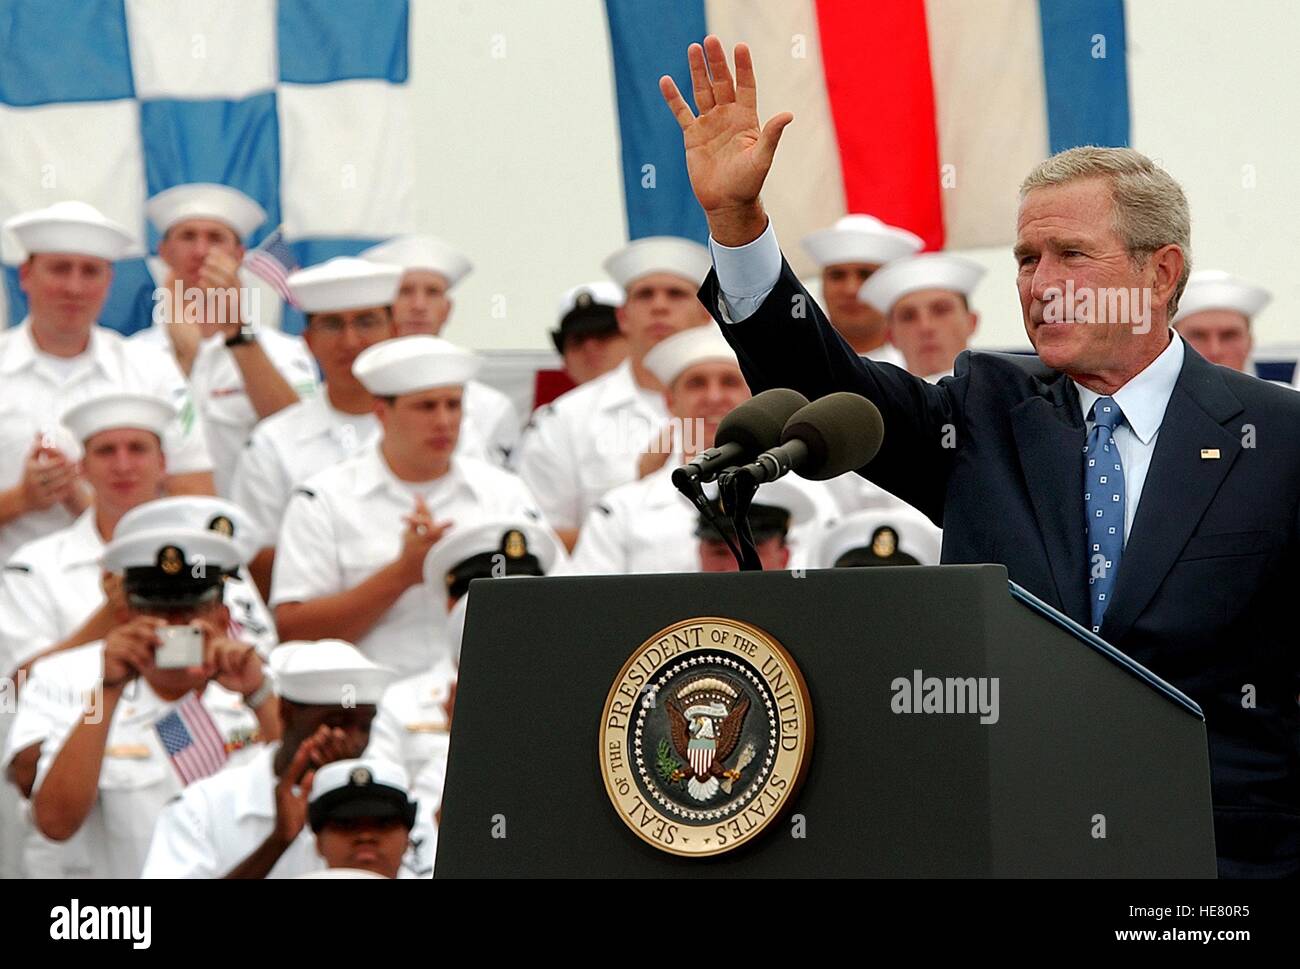 U.S. President George W. Bush waves to U.S. soldiers during an event commemorating the 60th anniversary of Victory over Japan Day at the Naval Air Station North Island August 30, 2005 in Coronado, California. Stock Photo